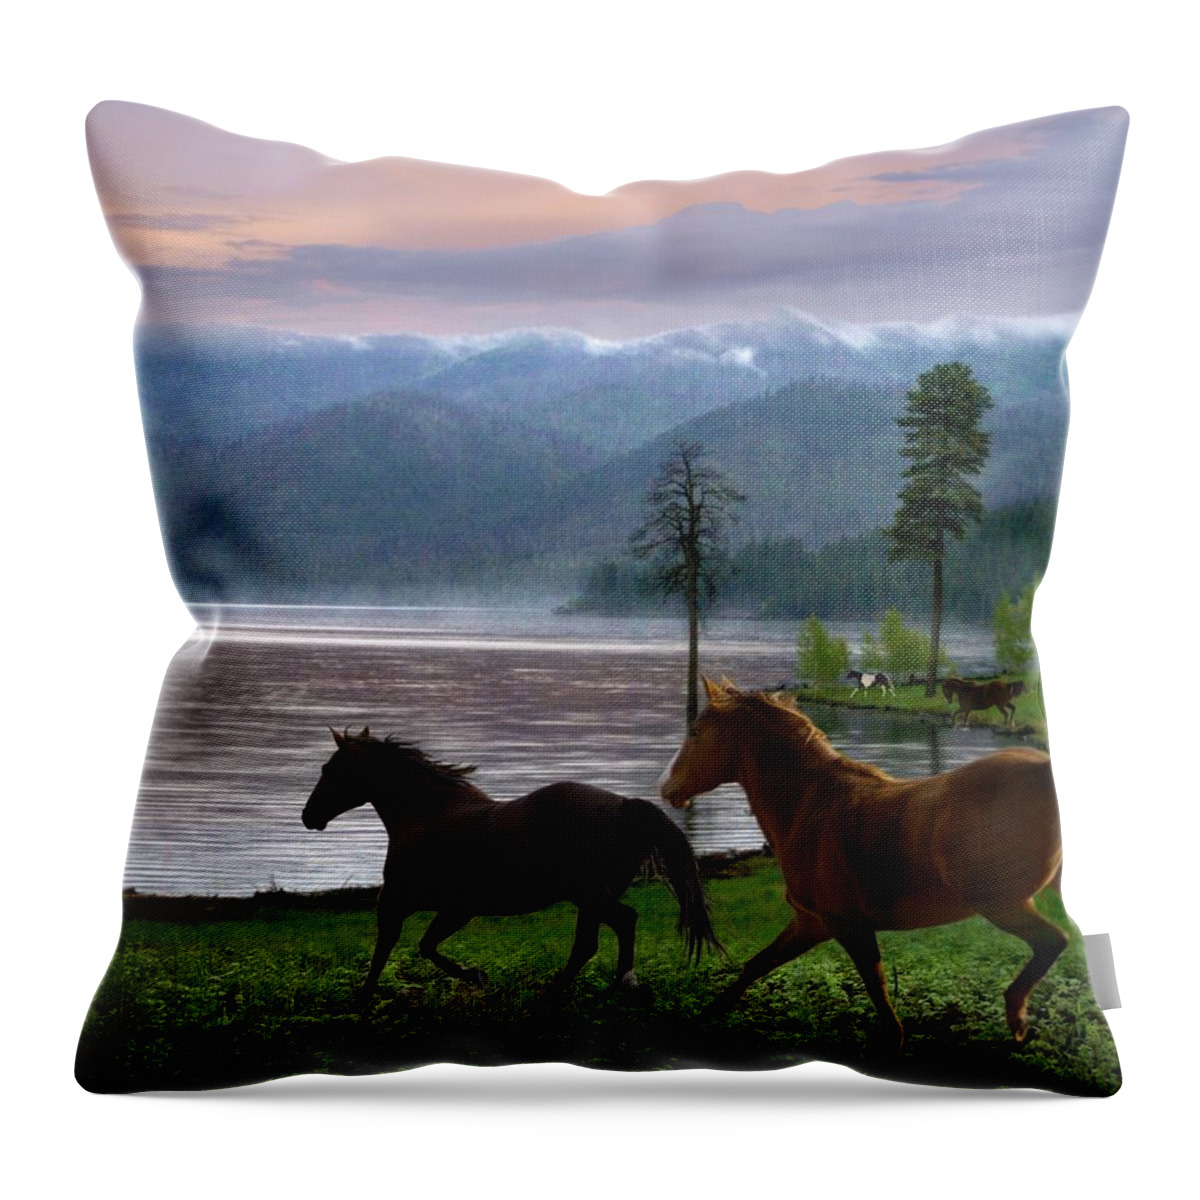 Horse Throw Pillow featuring the digital art At The Lake by Bill Stephens